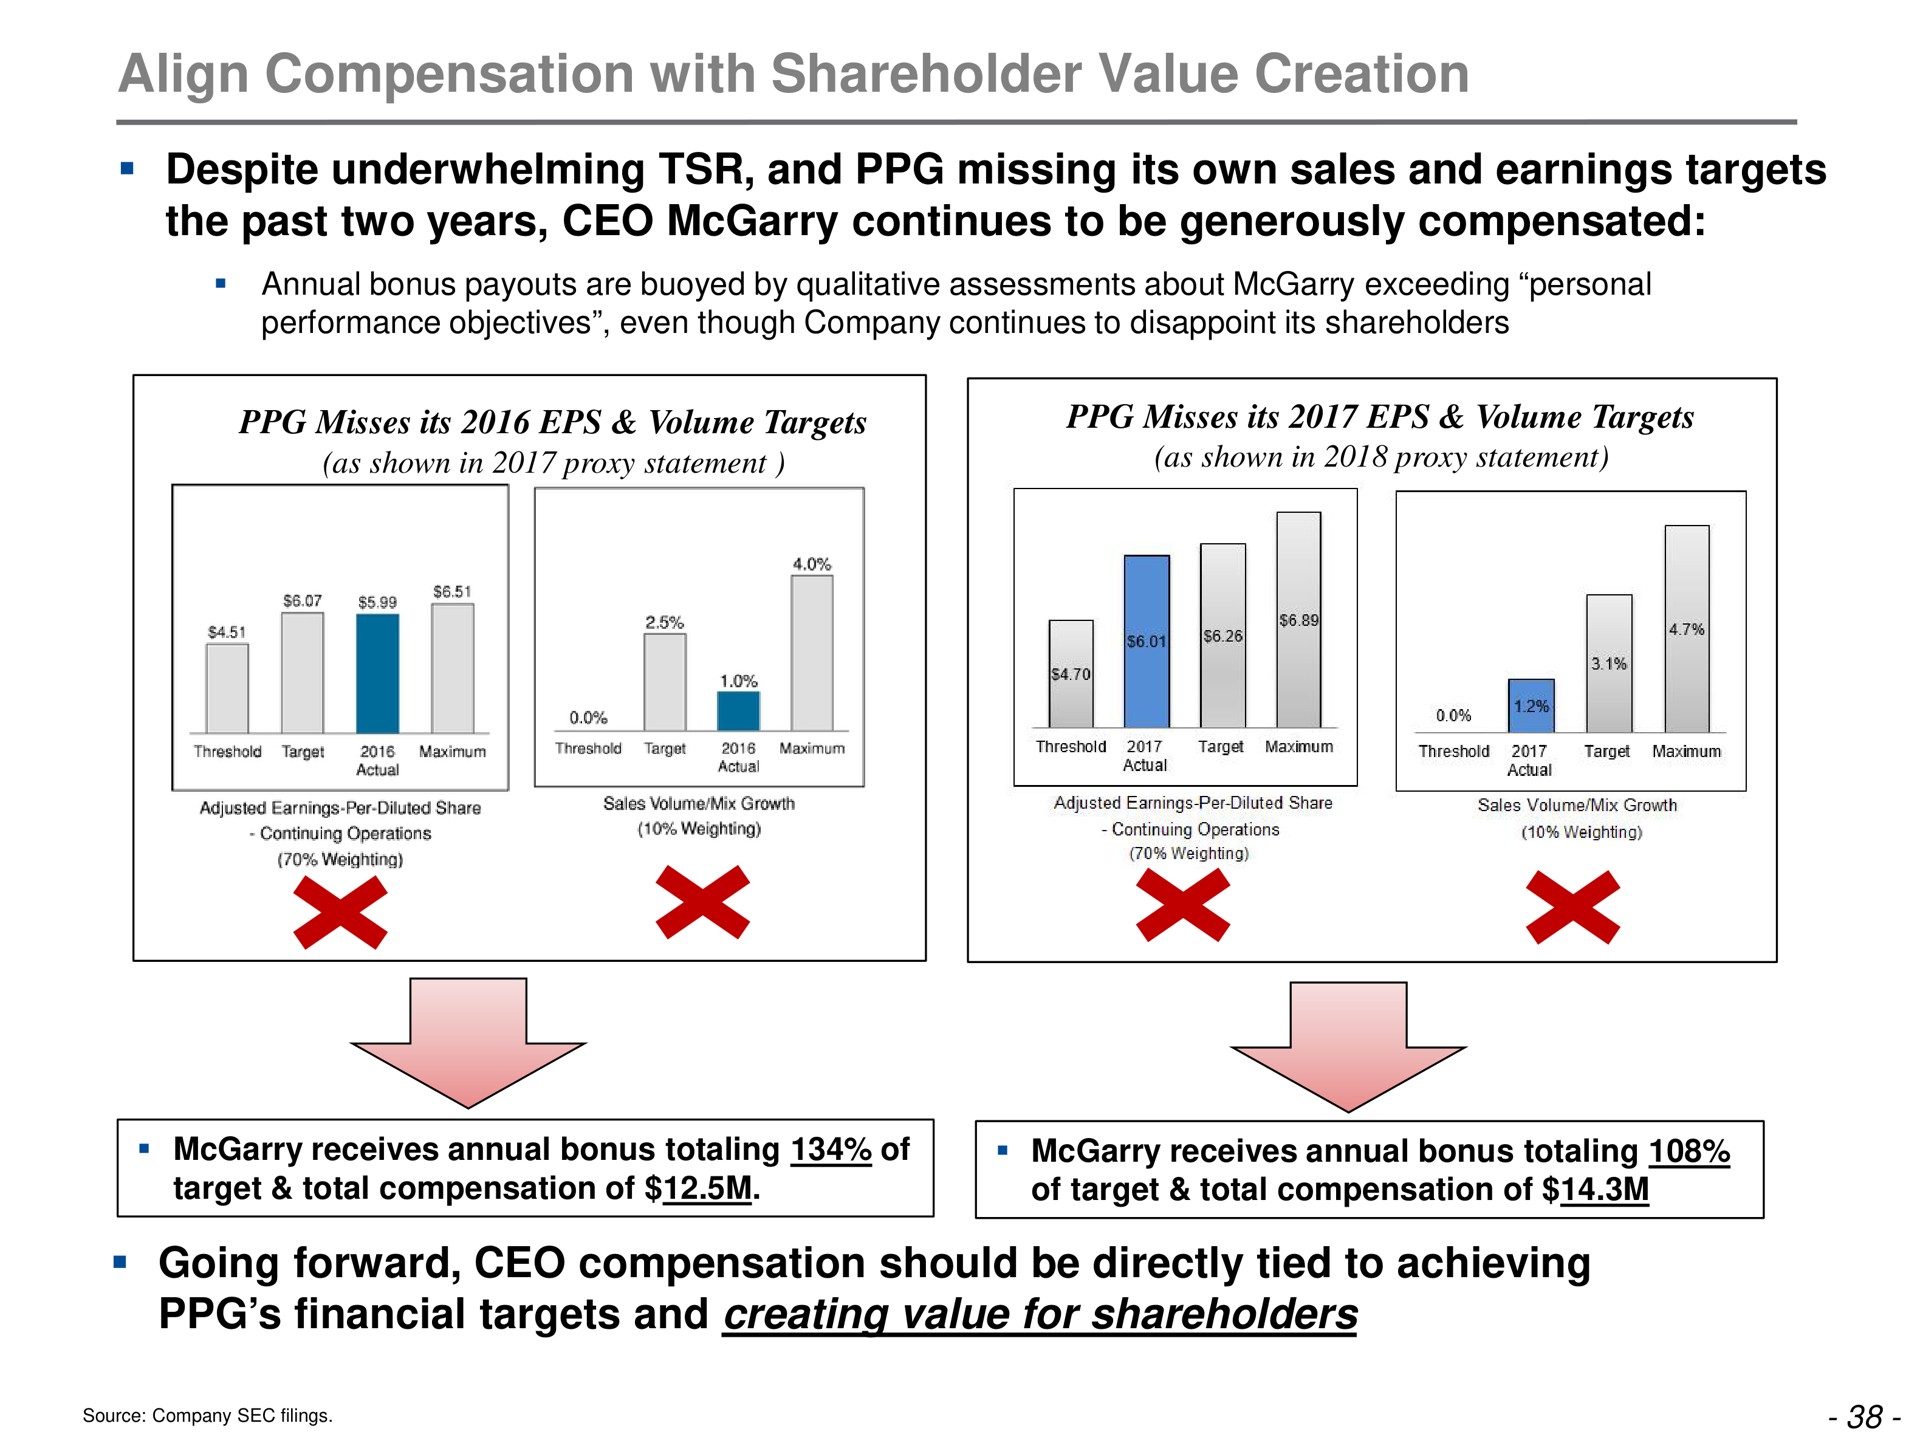 align compensation with shareholder value creation despite and missing its own sales and earnings targets the past two years continues to be generously compensated going forward compensation should be directly tied to achieving financial targets and creating value for shareholders | Trian Partners